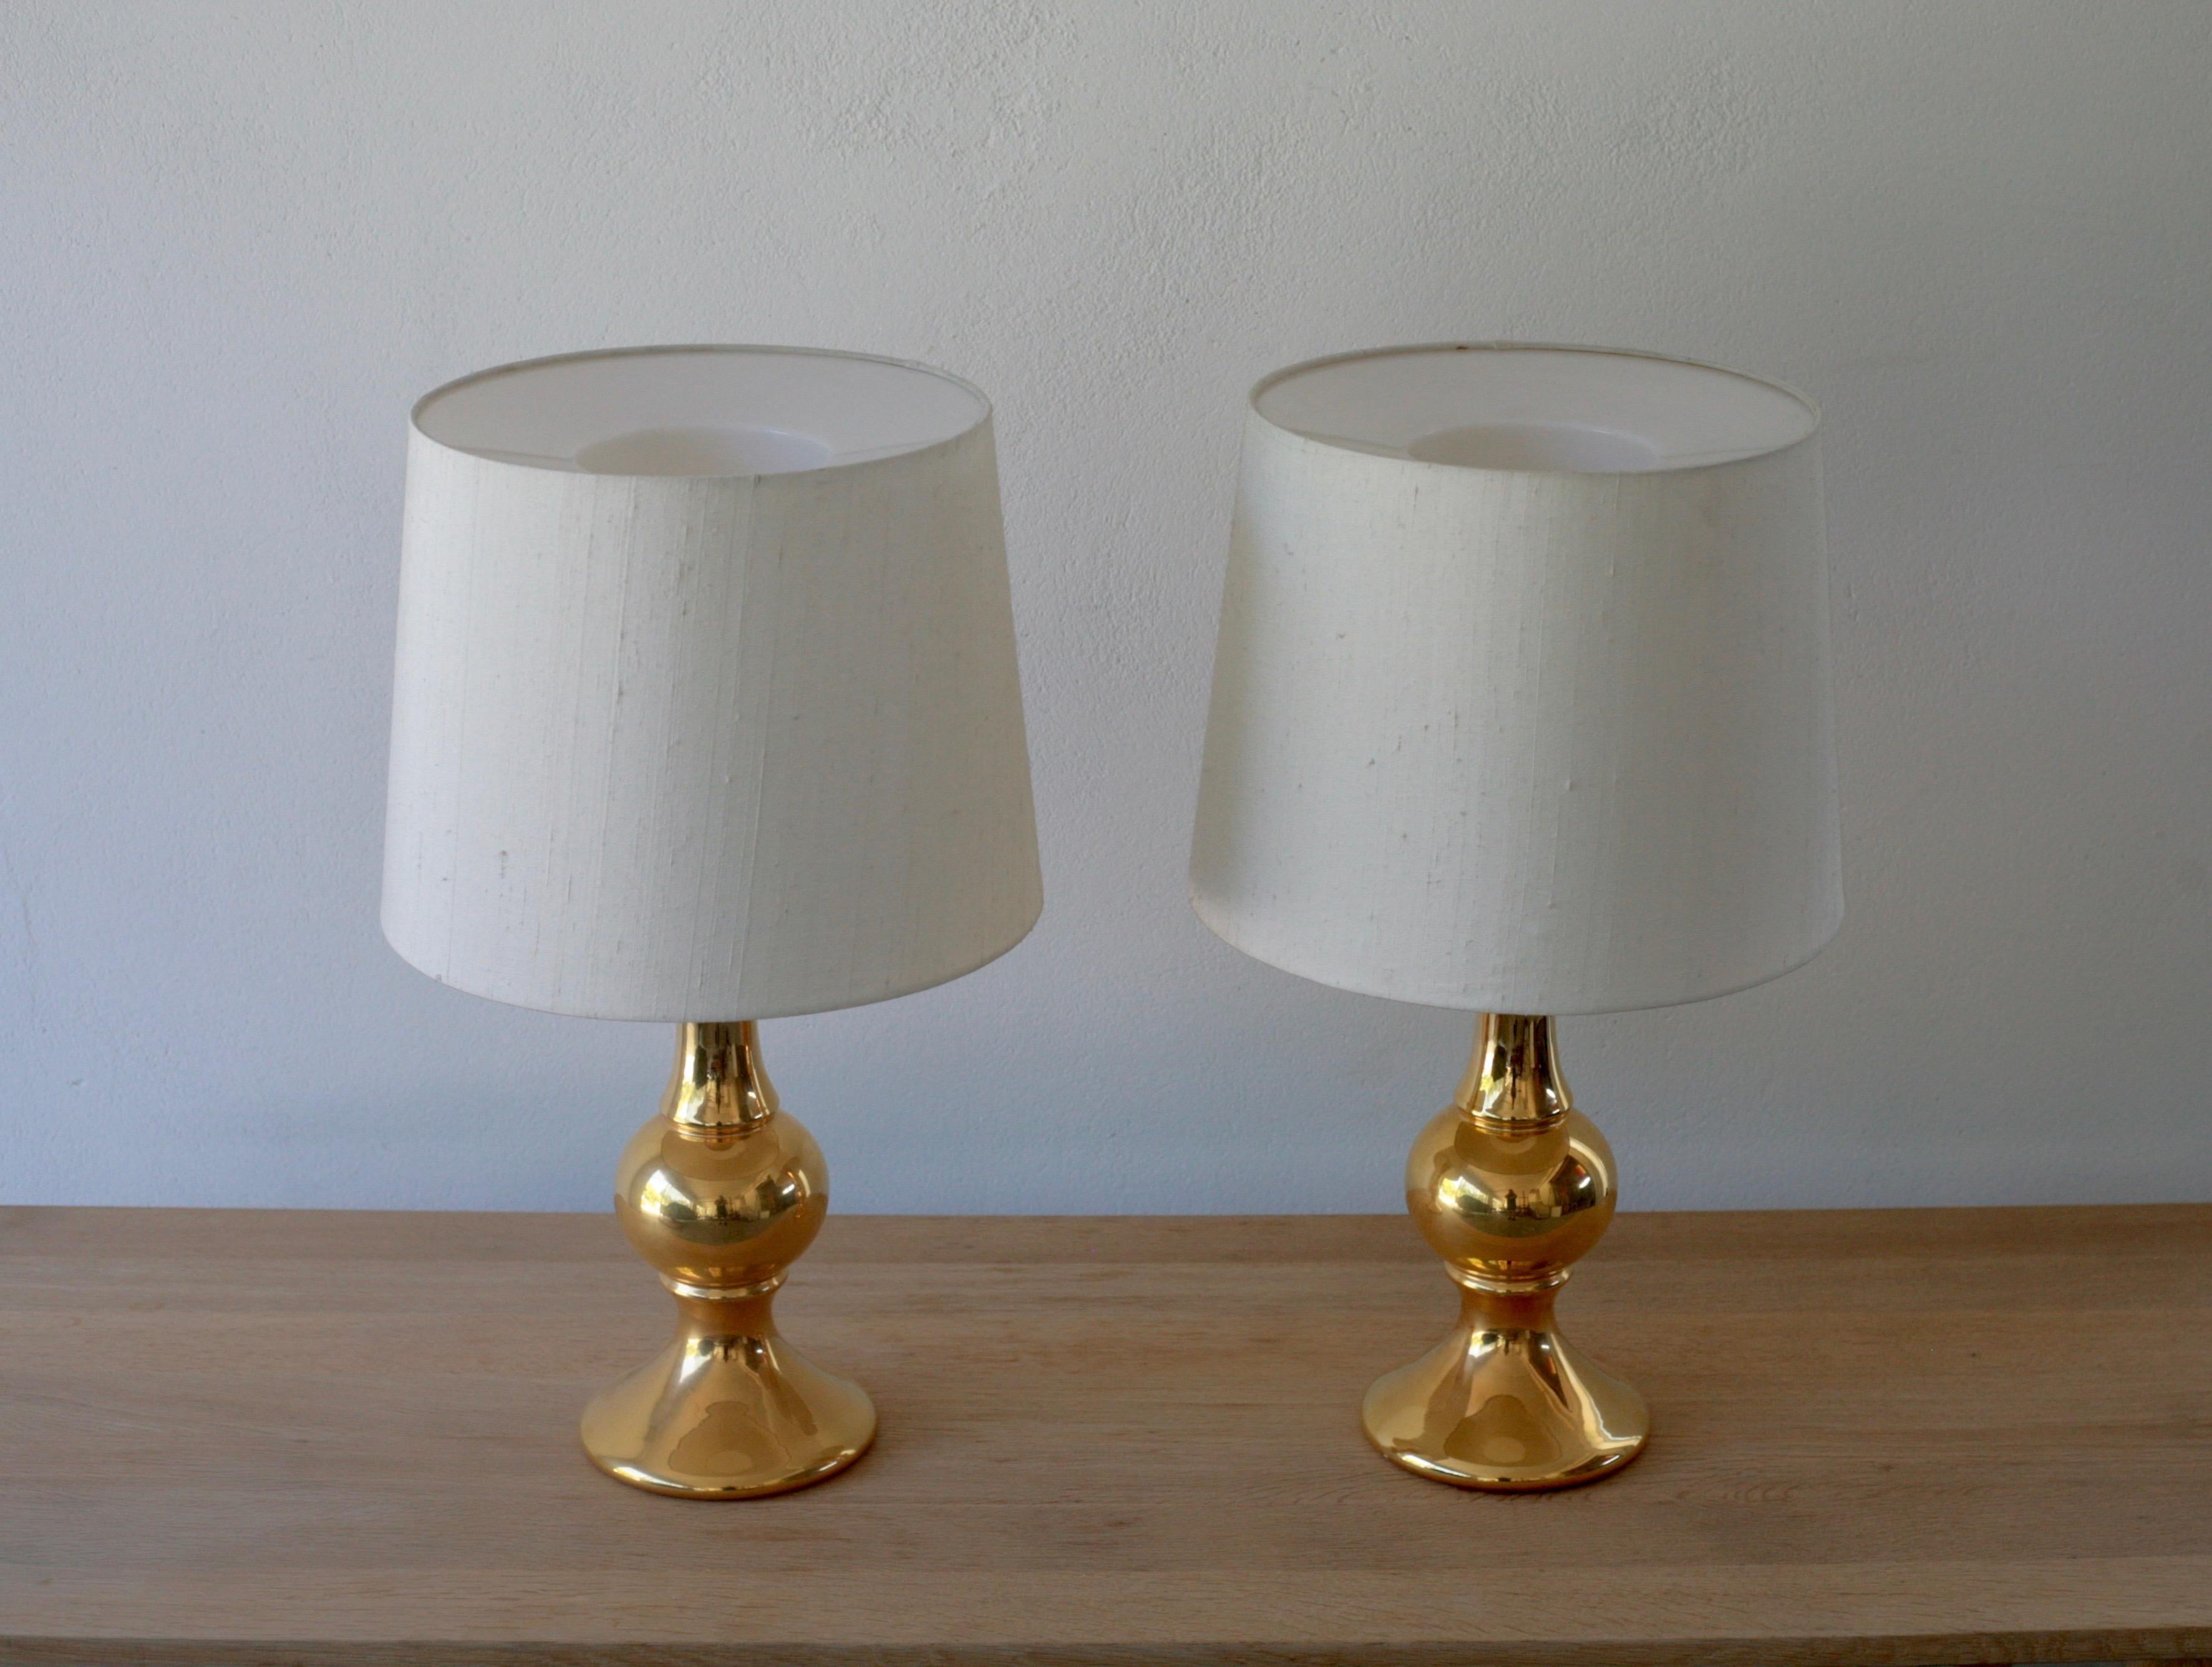 A pair of gilded glass table lamps designed by Swedish design brothers Uno & Östen Kristansson. Lamp feet made by Flygsfors glass factory in Sweden and the lamps assembled by Kristiansson´s own factory Luxus in Vittsjö, Sweden. Original linen shades.